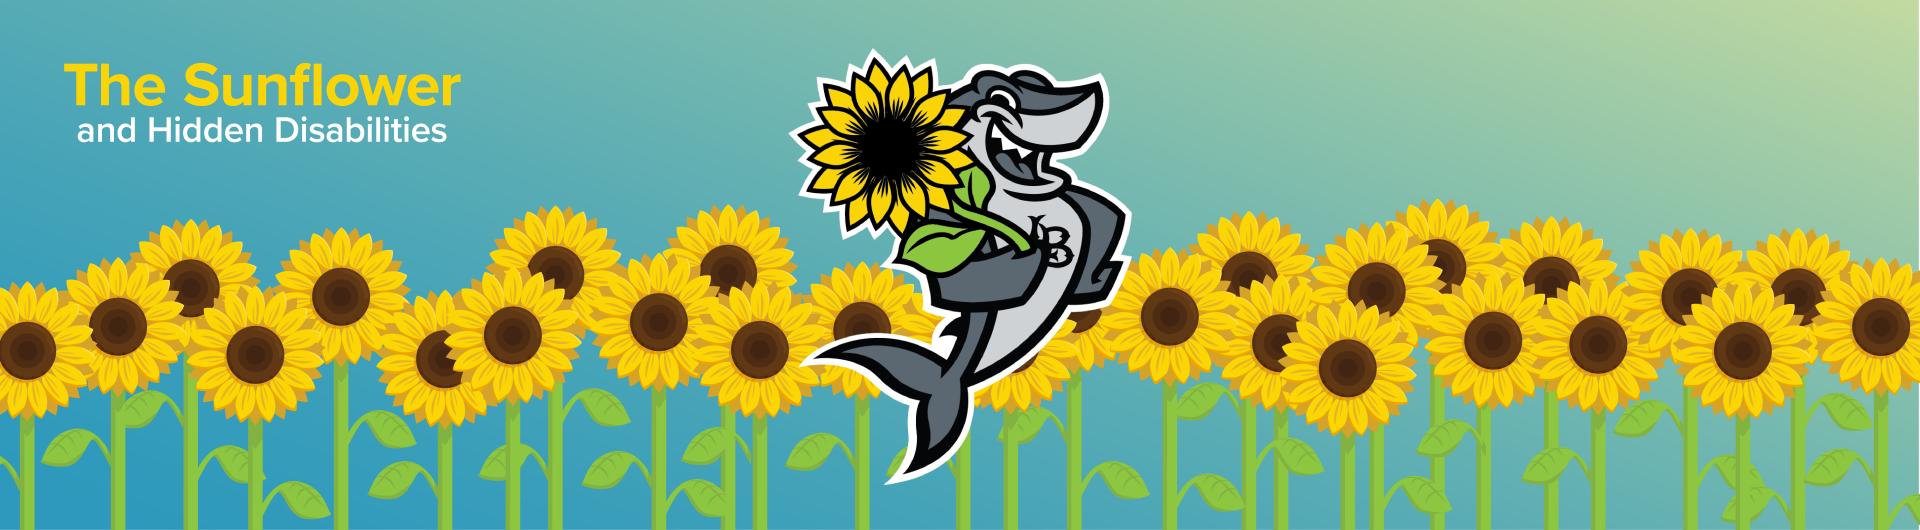 Elbee holding a sunflower with sunflowers in the background representing Hidden Disabilities. 